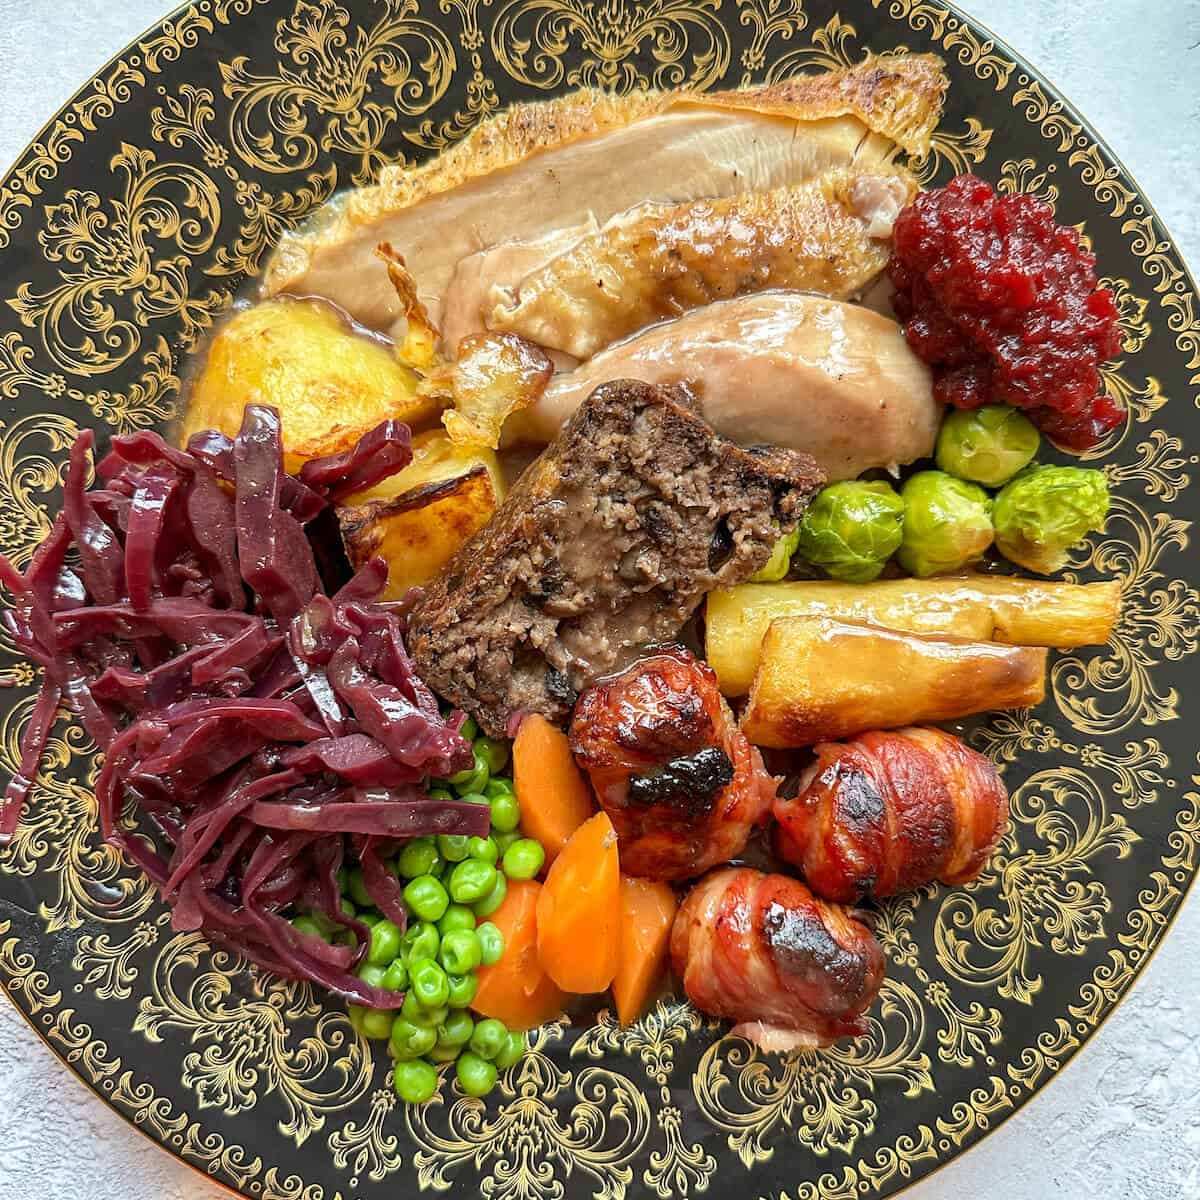 A plate of Christmas dinner full of capon chicken, red cabbage, parsnips, peas, stuffing, roast potatoes and gravy. 